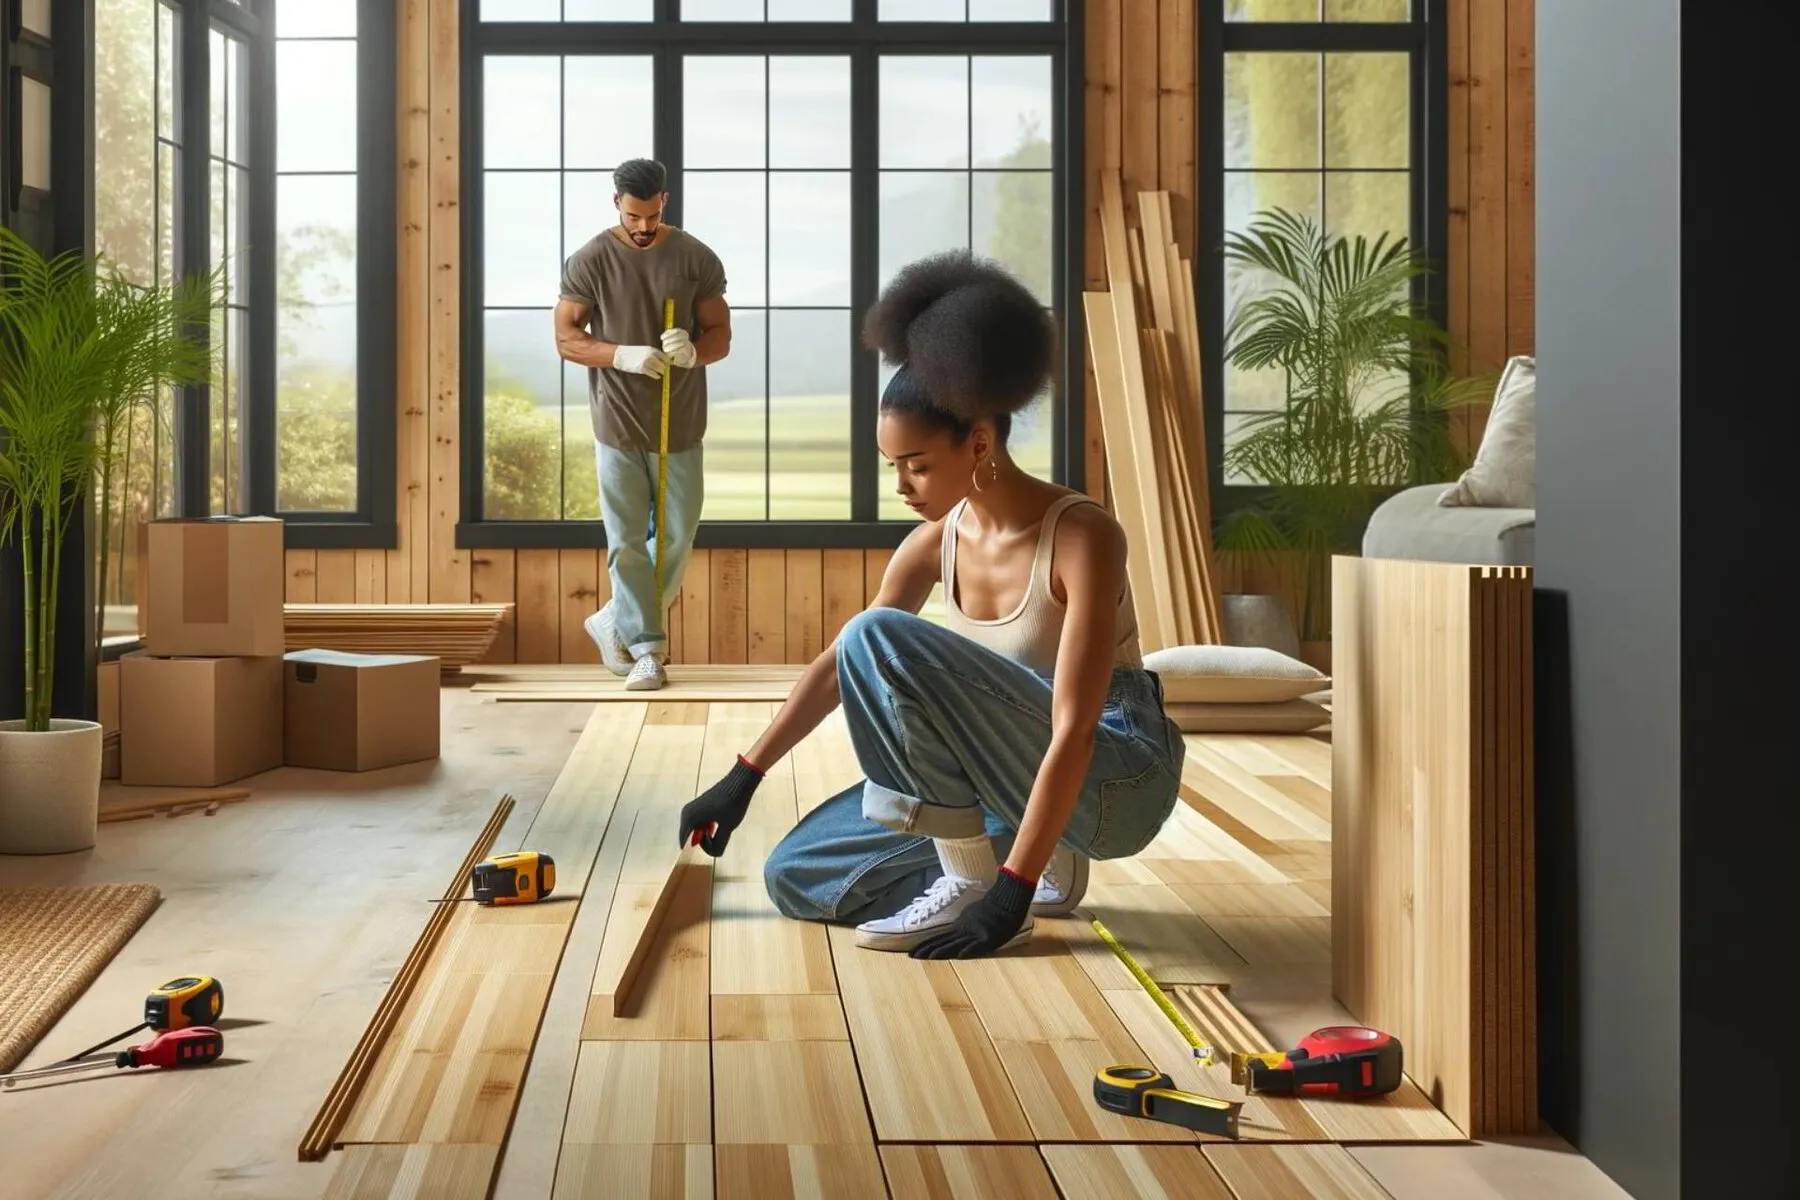 A scene of DIY homeowners working on installing bamboo flooring in their home